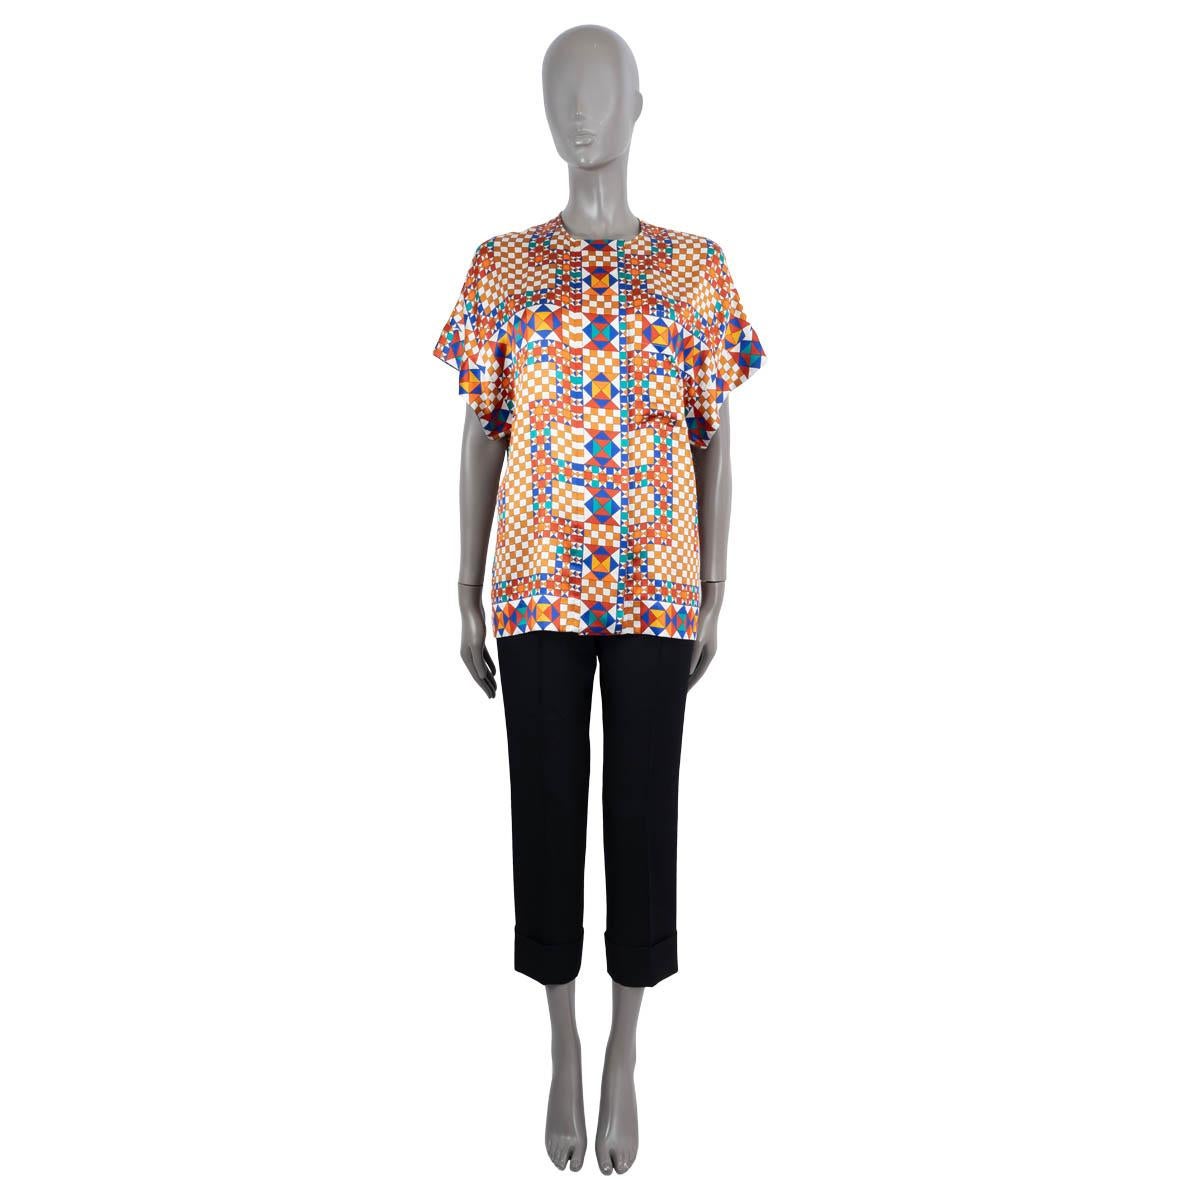 100% authentic Hermes geometric print short sleeve blouse in blue, rust, petrol, brow, orange off-white silk (100%). Features one flap pockets and a crewneck. Closes with concealed buttons on the front. Unlined. Has been worn and is in excellent